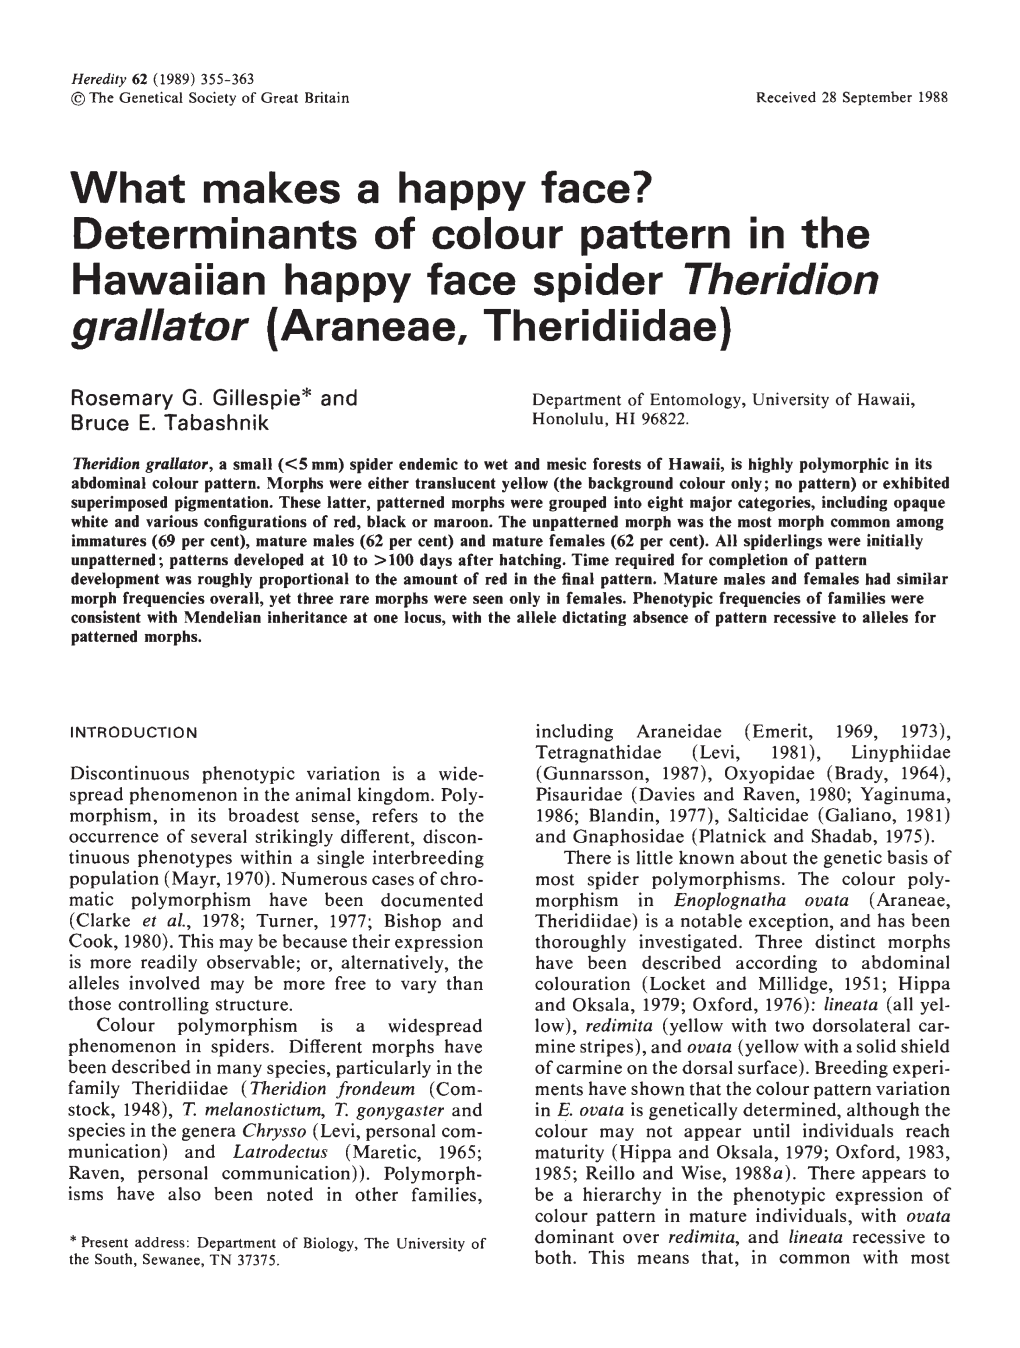 Determinants of Colour Pattern in the Hawaiian Happy Face Spider Theridion Grallator (Araneae, Theridiidae)